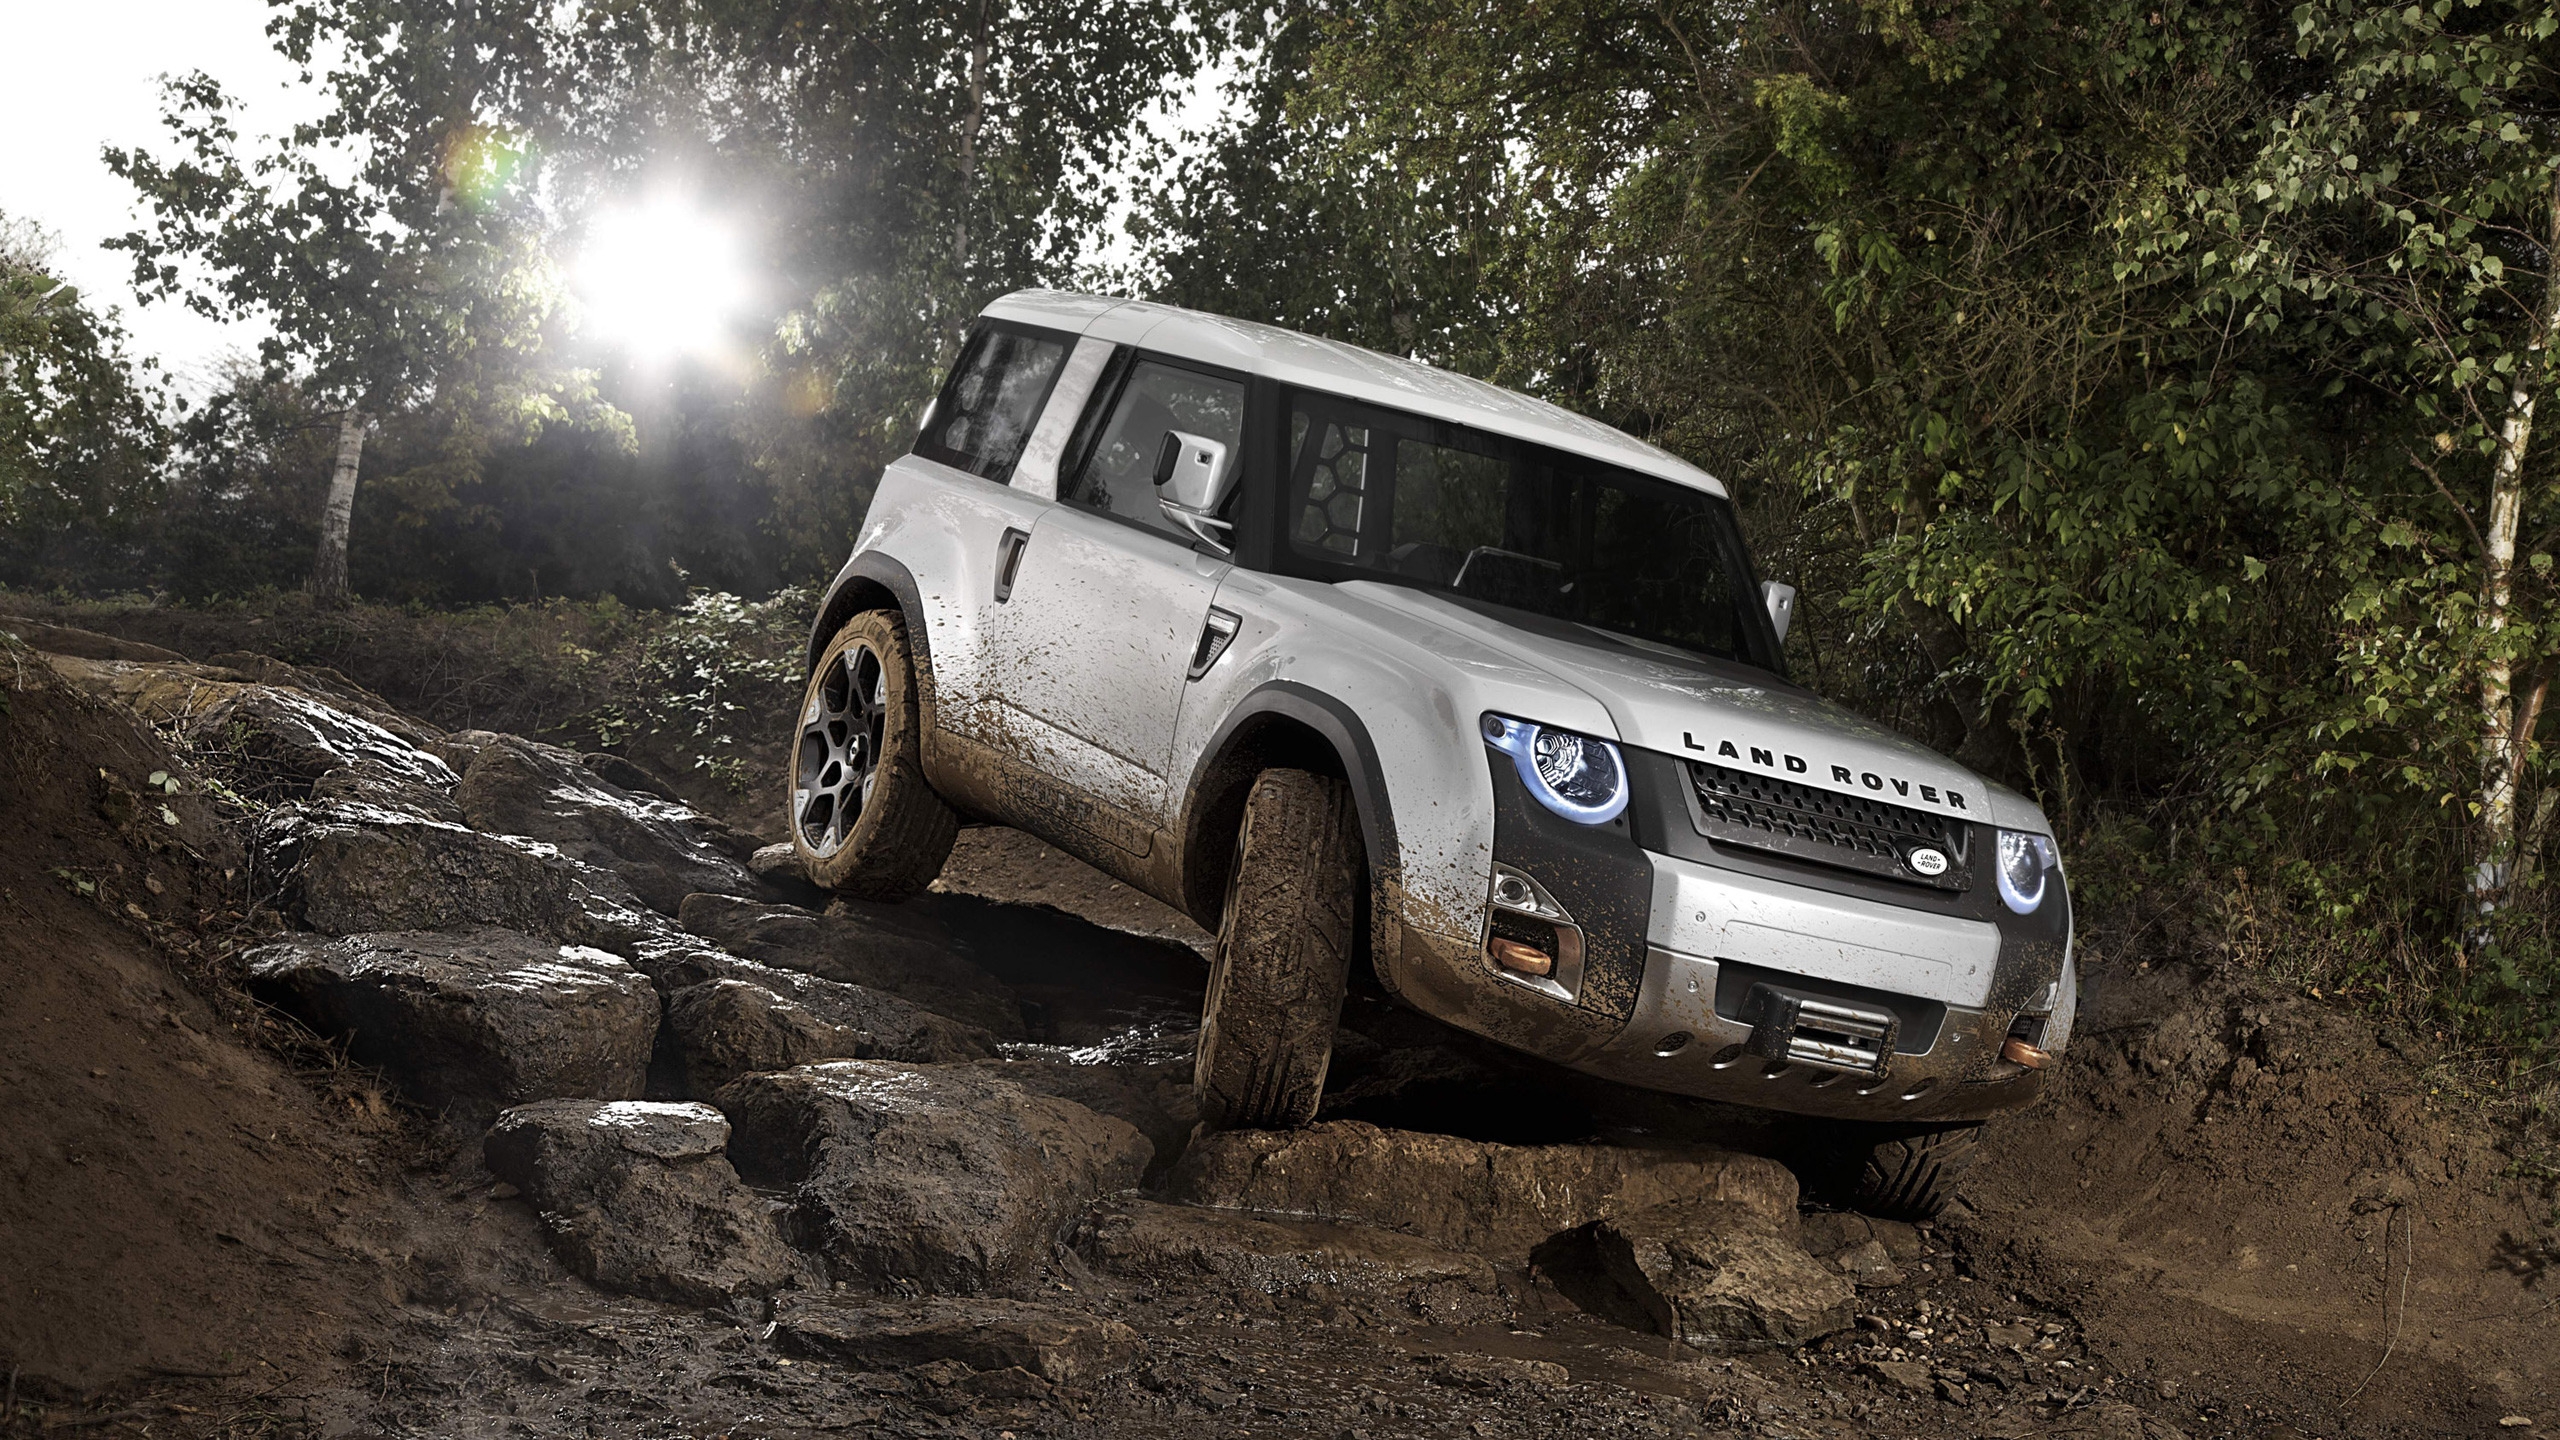 Land Rover DC100 Concept for 2560x1440 HDTV resolution